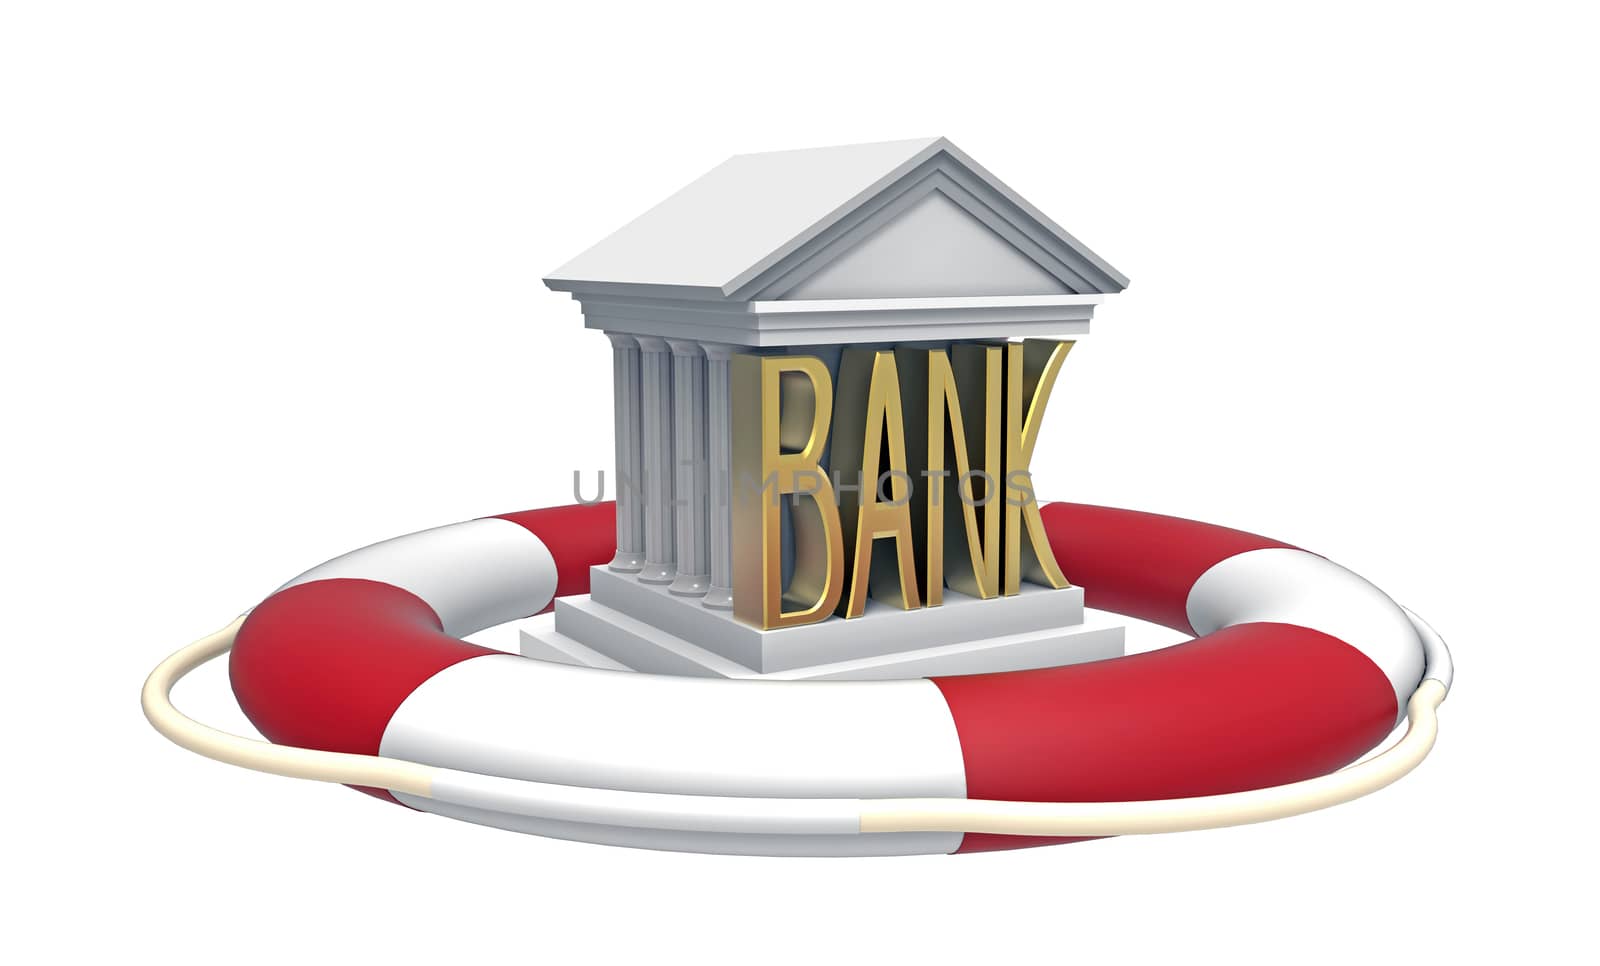 Bank with lifebuoy, 3D render, isolated on white